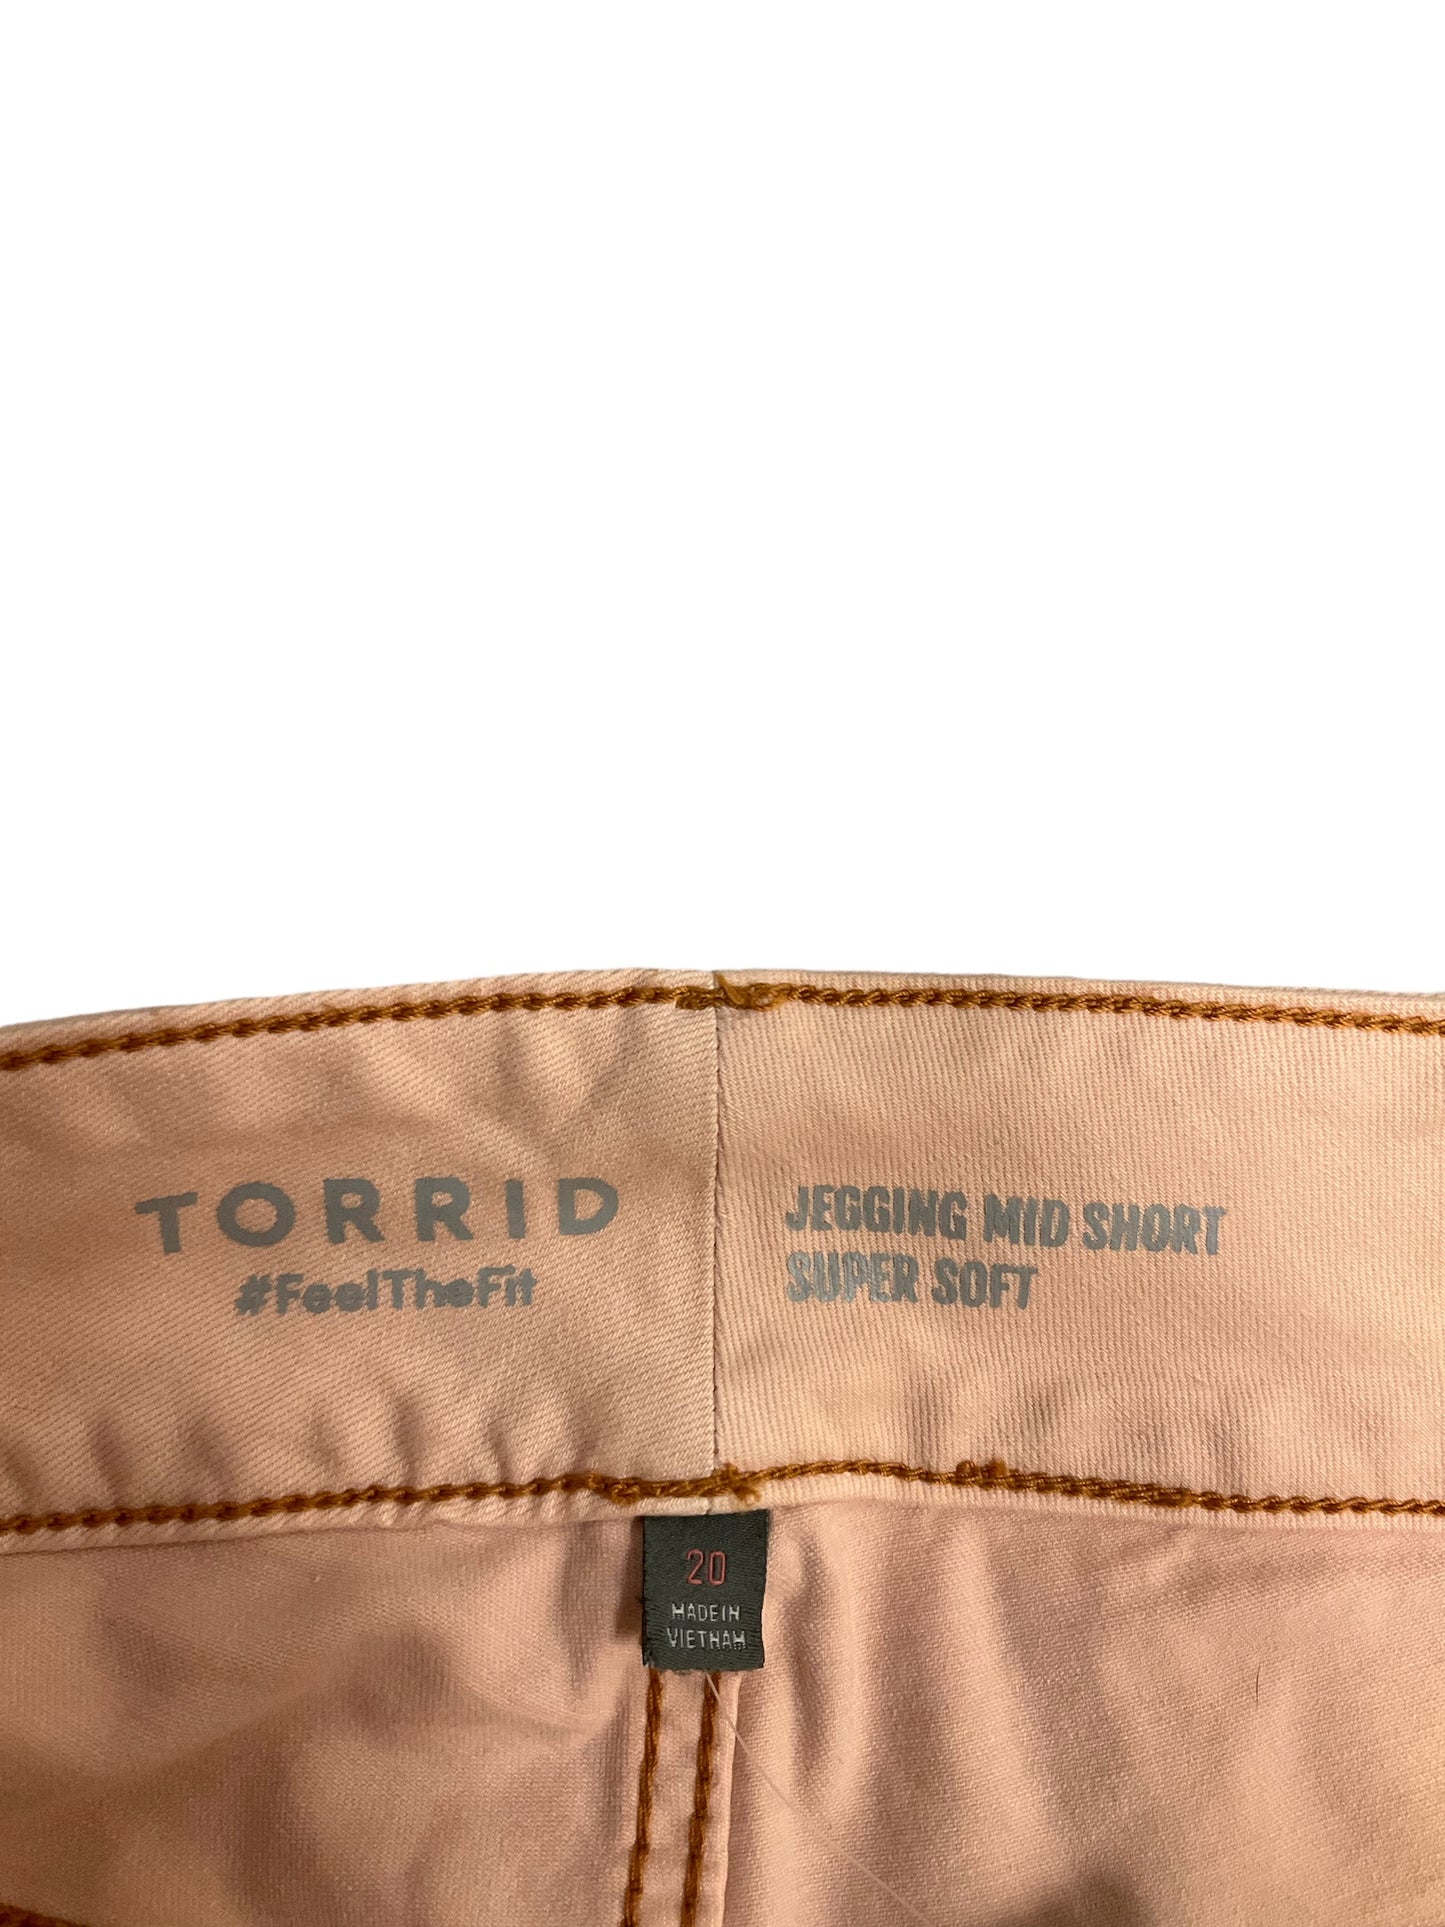 Shorts By Torrid  Size: 20